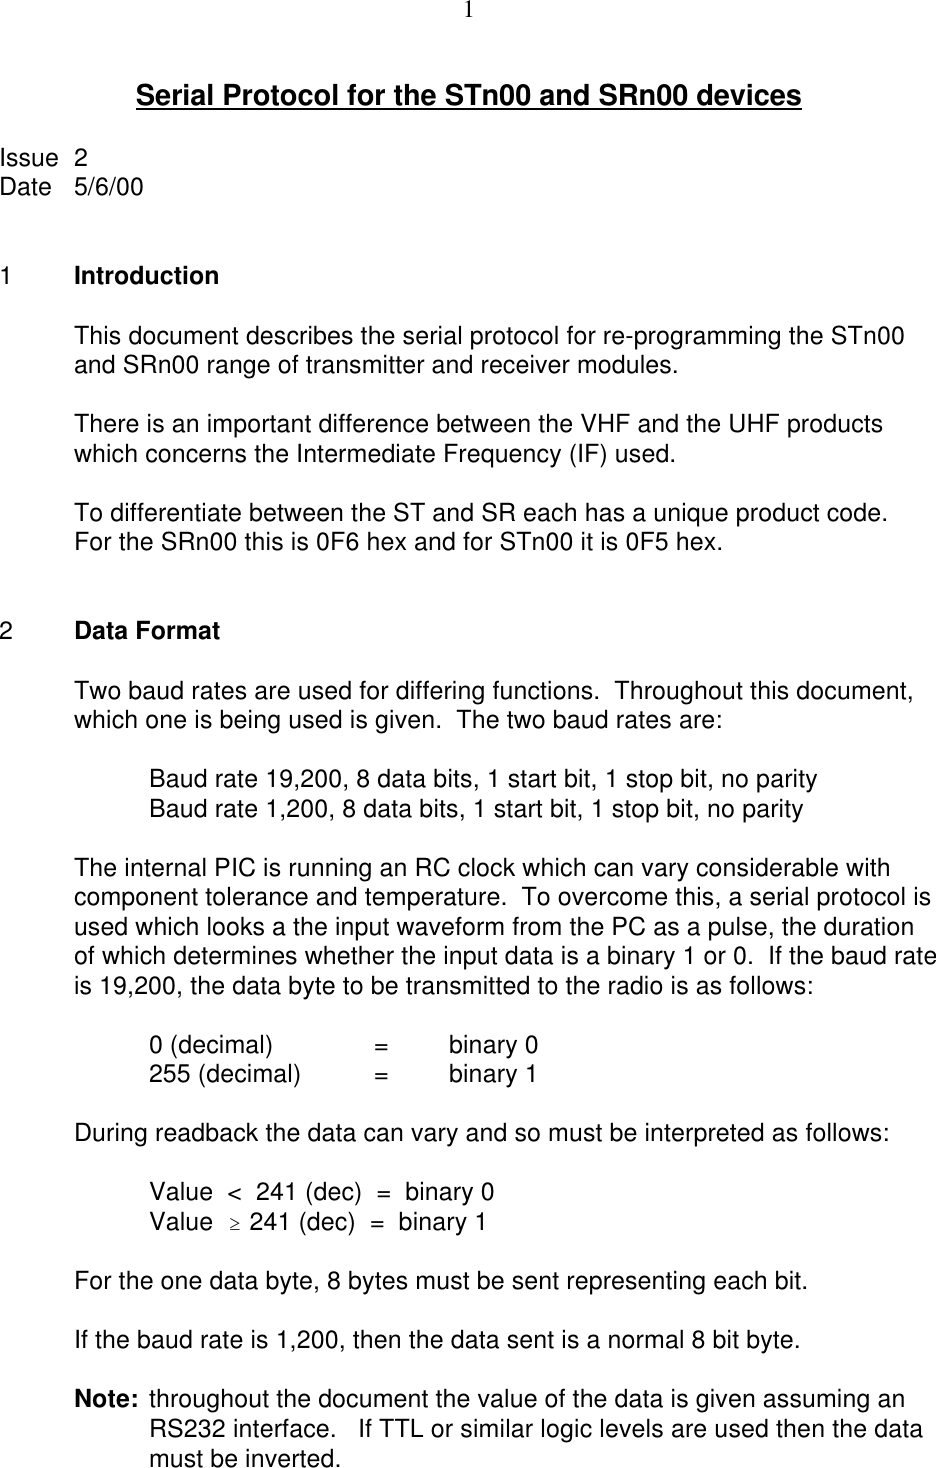 1Serial Protocol for the STn00 and SRn00 devicesIssue  2Date 5/6/001IntroductionThis document describes the serial protocol for re-programming the STn00and SRn00 range of transmitter and receiver modules.There is an important difference between the VHF and the UHF productswhich concerns the Intermediate Frequency (IF) used.To differentiate between the ST and SR each has a unique product code. For the SRn00 this is 0F6 hex and for STn00 it is 0F5 hex.2Data FormatTwo baud rates are used for differing functions.  Throughout this document,which one is being used is given.  The two baud rates are:Baud rate 19,200, 8 data bits, 1 start bit, 1 stop bit, no parityBaud rate 1,200, 8 data bits, 1 start bit, 1 stop bit, no parityThe internal PIC is running an RC clock which can vary considerable withcomponent tolerance and temperature.  To overcome this, a serial protocol isused which looks a the input waveform from the PC as a pulse, the durationof which determines whether the input data is a binary 1 or 0.  If the baud rateis 19,200, the data byte to be transmitted to the radio is as follows:0 (decimal)  =binary 0255 (decimal) =binary 1During readback the data can vary and so must be interpreted as follows: Value  &lt;  241 (dec)  =  binary 0Value  $ 241 (dec)  =  binary 1For the one data byte, 8 bytes must be sent representing each bit.If the baud rate is 1,200, then the data sent is a normal 8 bit byte.Note: throughout the document the value of the data is given assuming anRS232 interface.   If TTL or similar logic levels are used then the datamust be inverted.